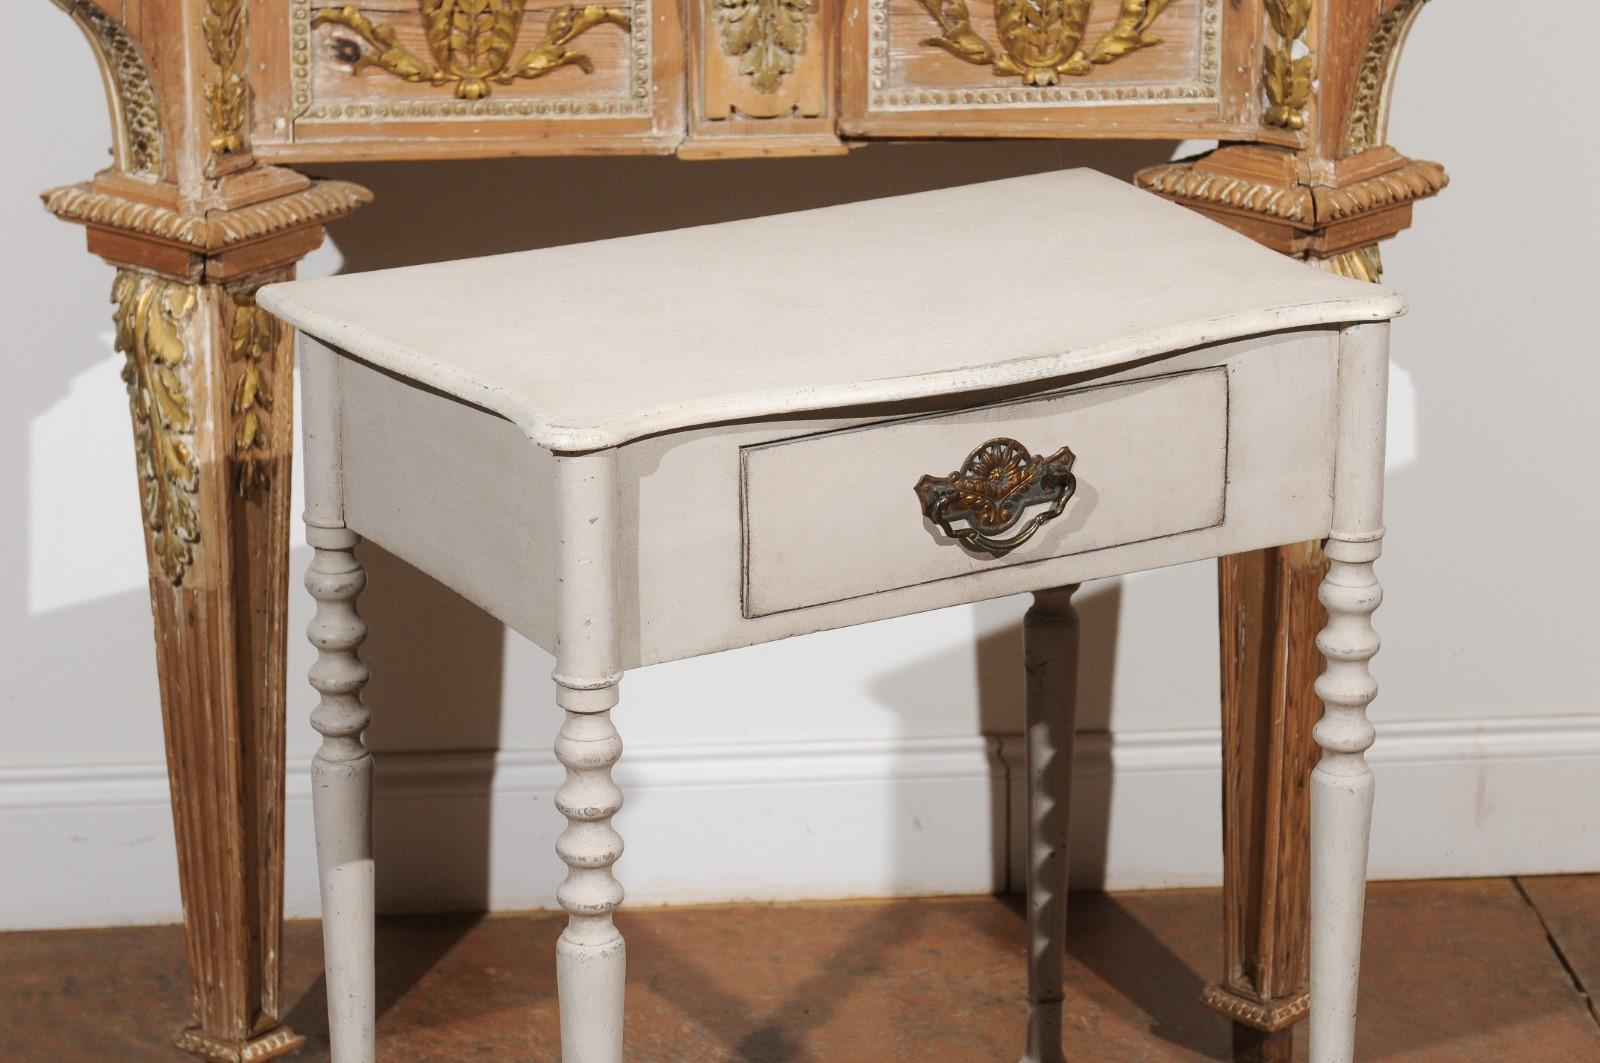 19th Century Swedish Painted Side Table with Single Drawer, Turned Legs and Serpentine Front For Sale